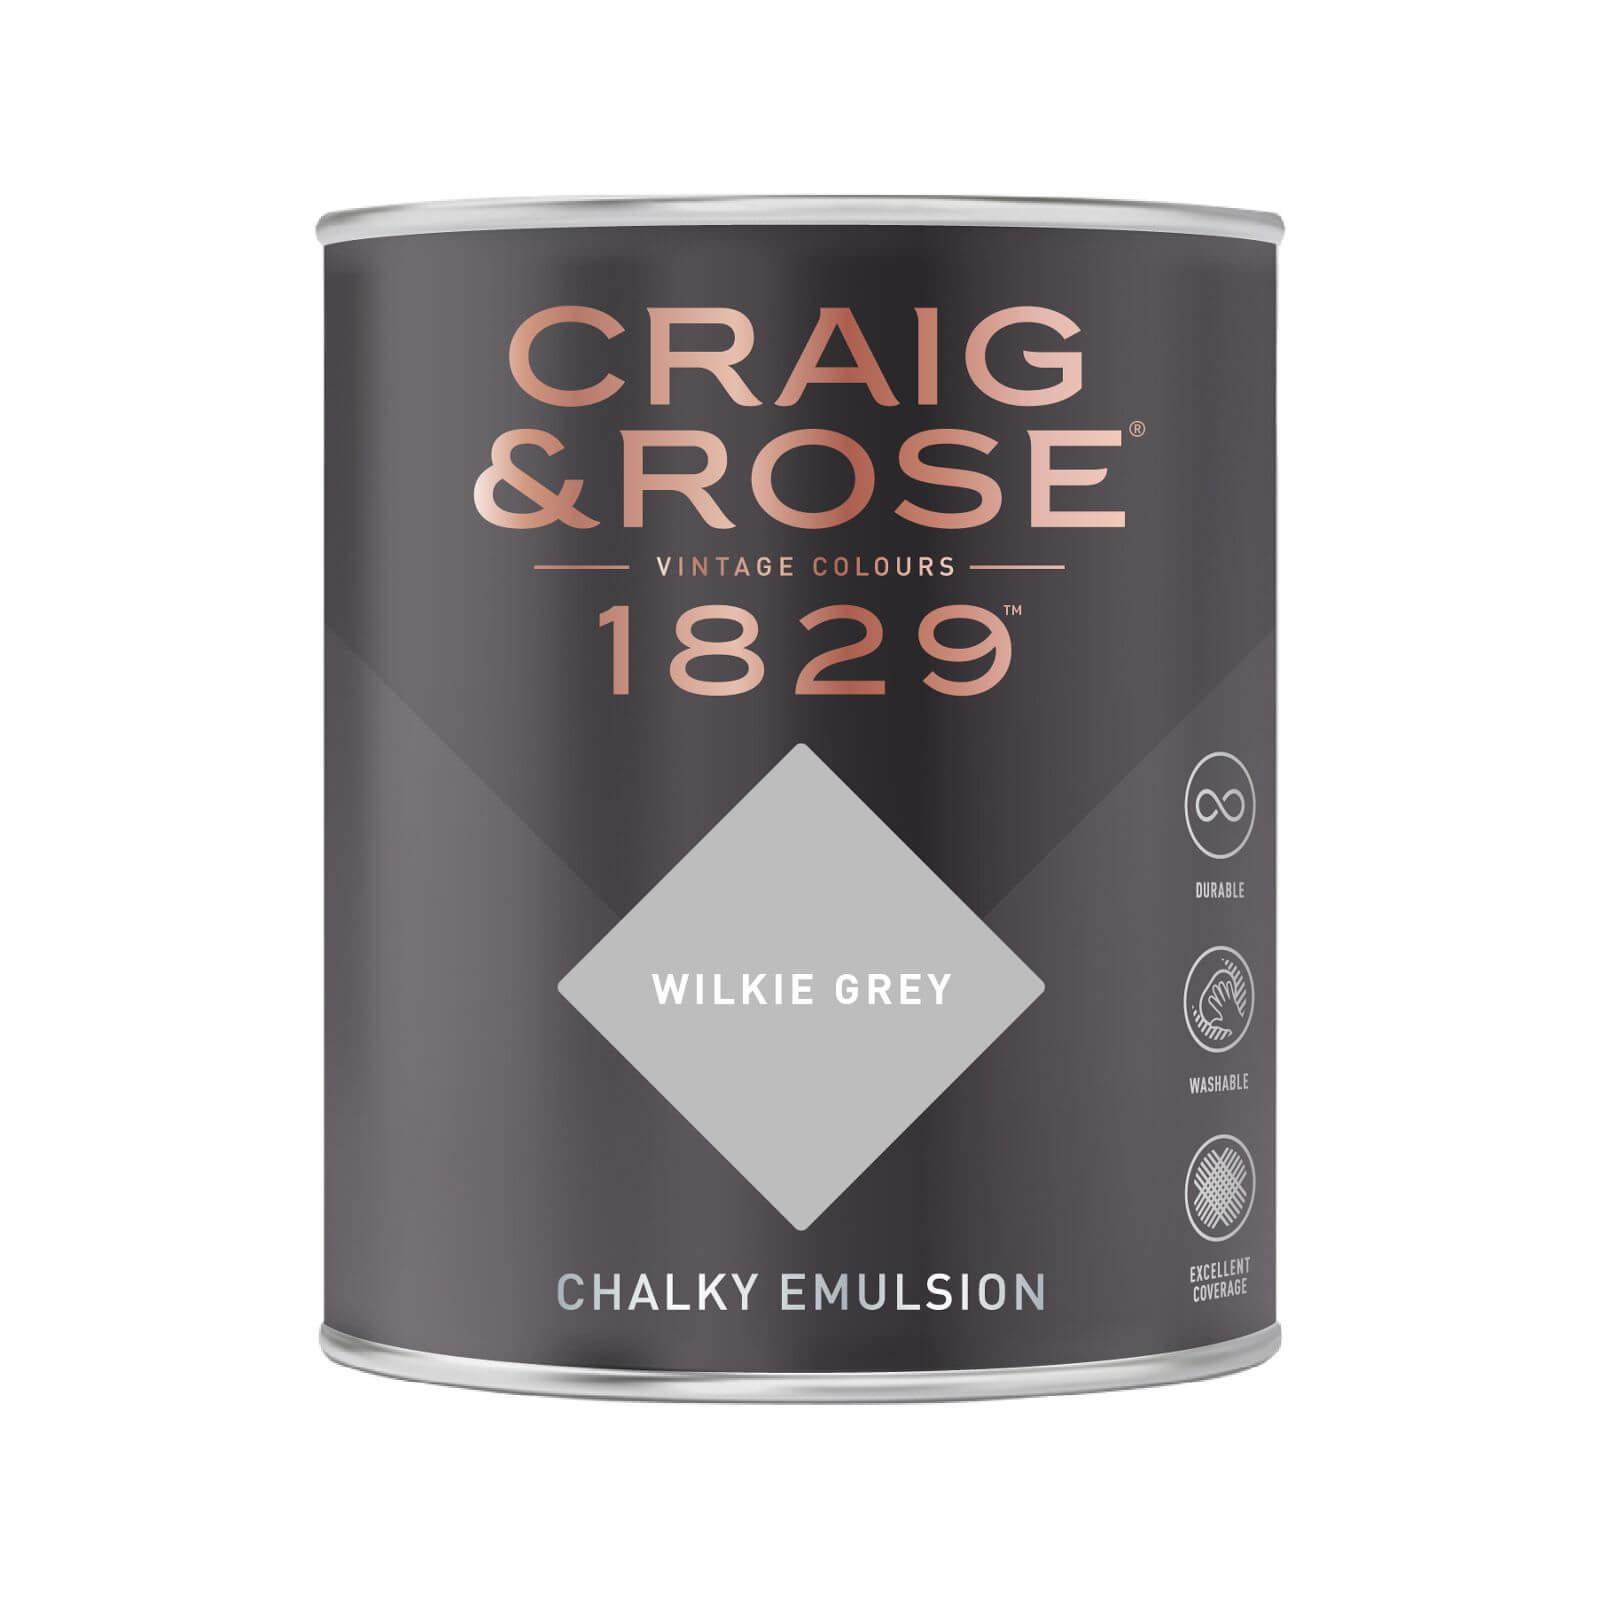 Craig & Rose 1829 Chalky Emulsion Paint Wilkie Grey - 750ml